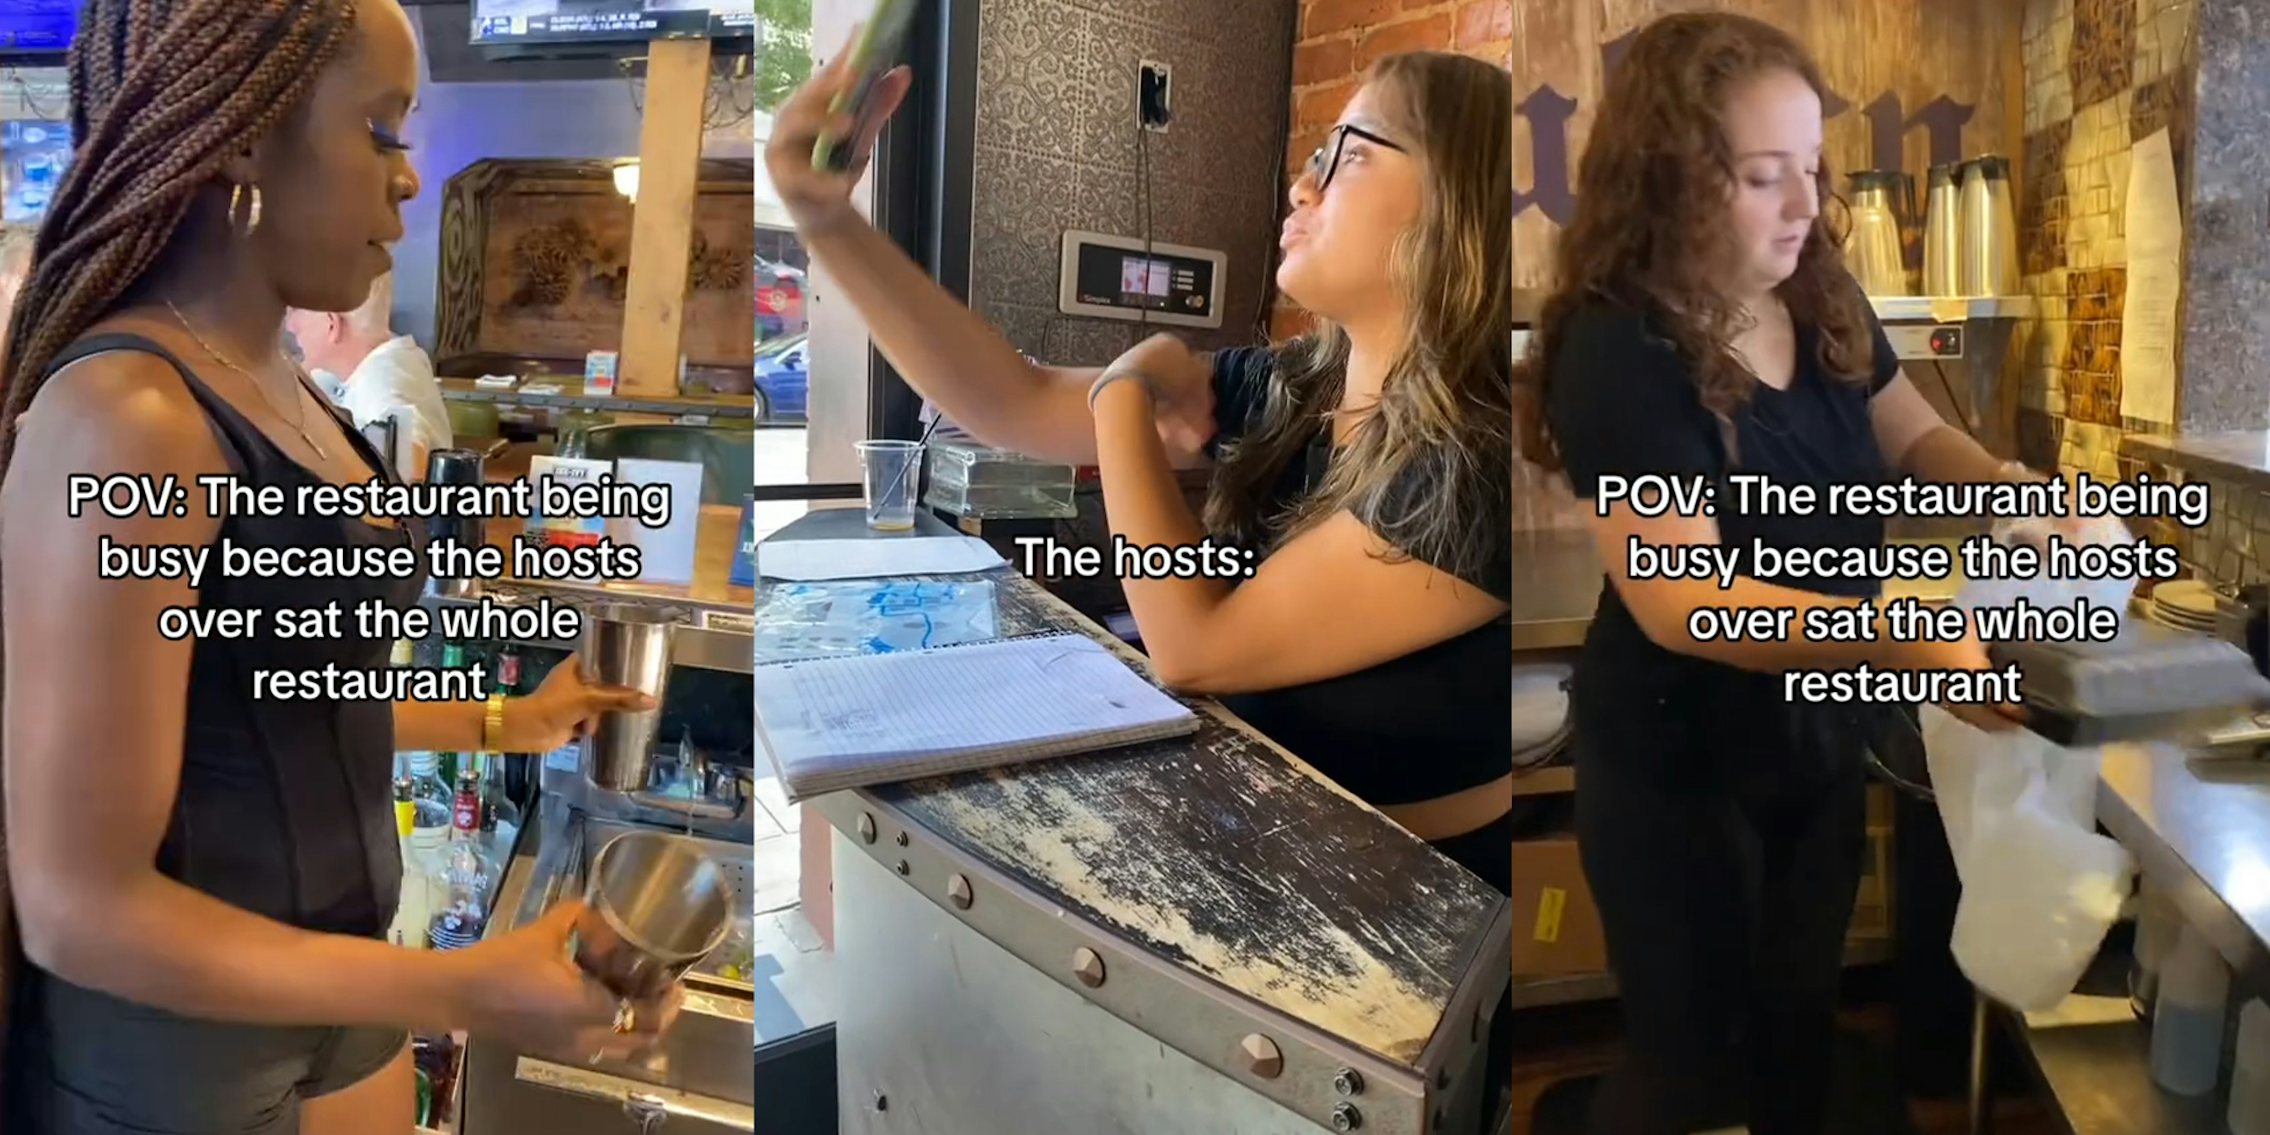 Server calls out hostesses for overseating the restaurant